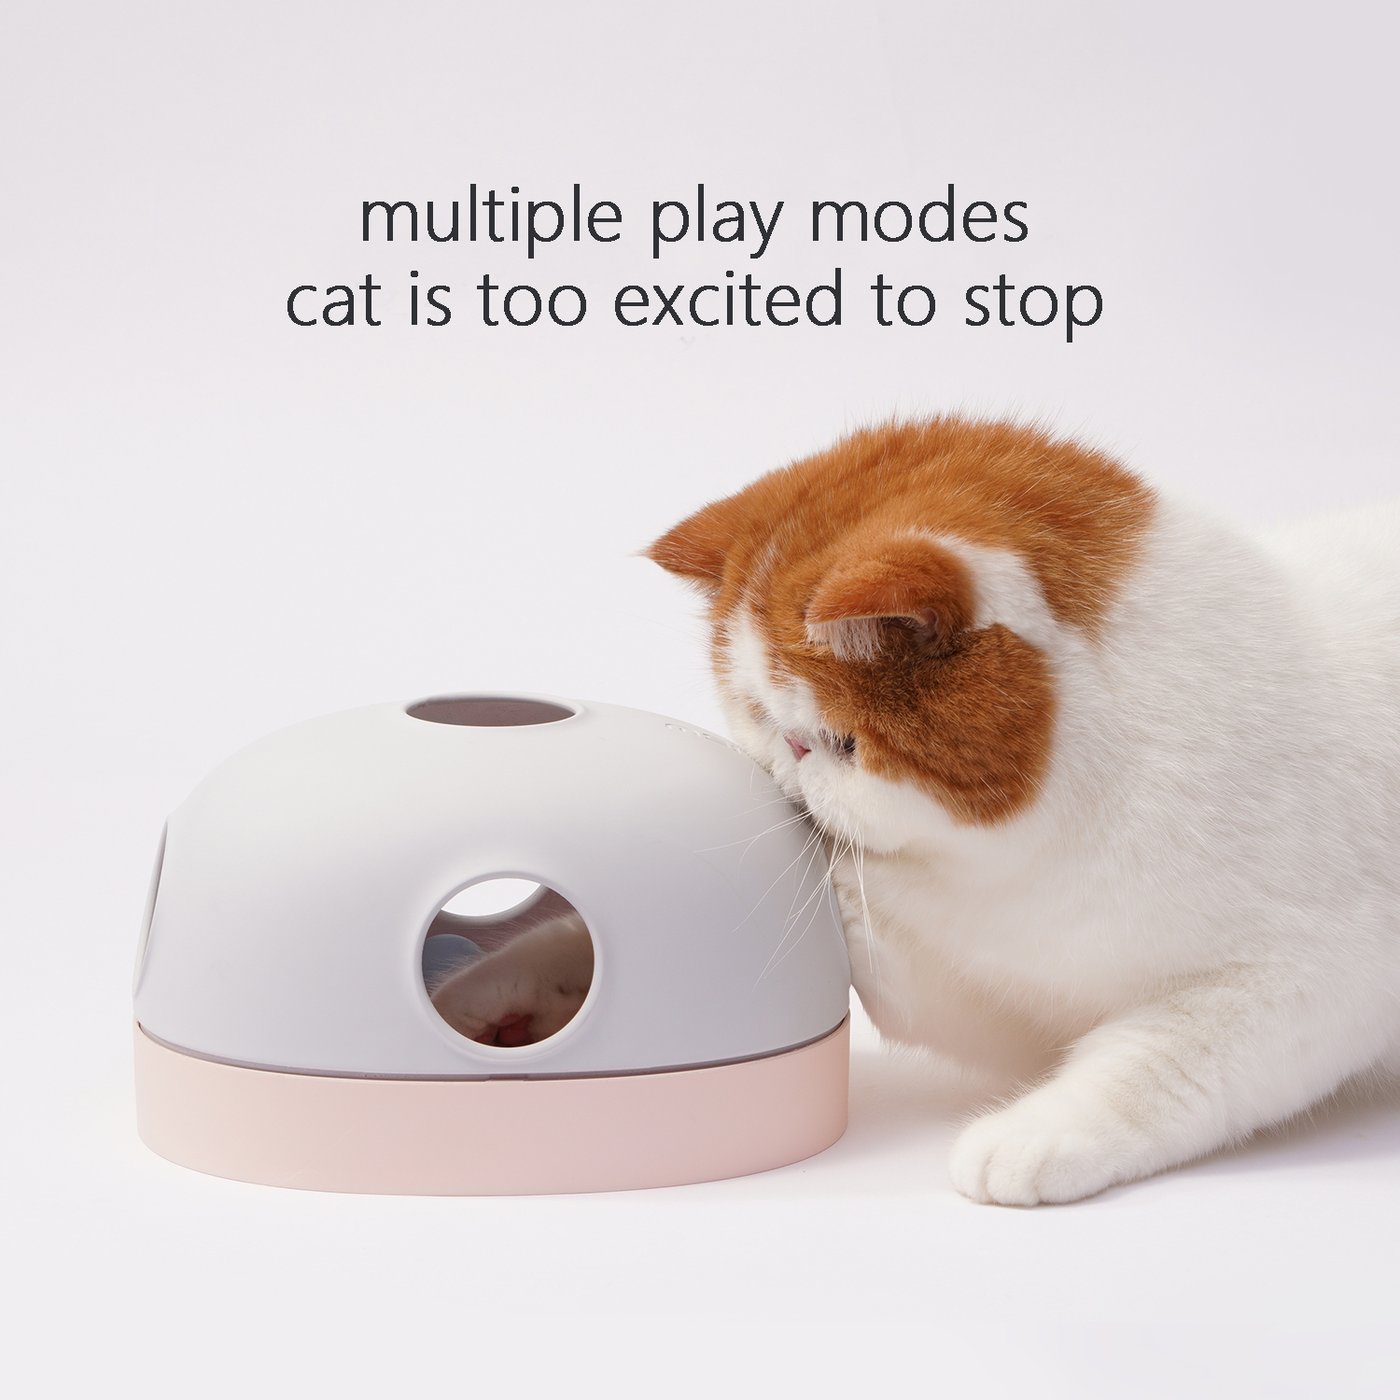 A 3-in-1 cat toy designed to unleash cats' hunting nature, relief stress and break from boredom. A purr-fect game to keep cats entertained whether you are home or away from home.  Made of healthy and environmentally friendly material to ensure cats' safety. 